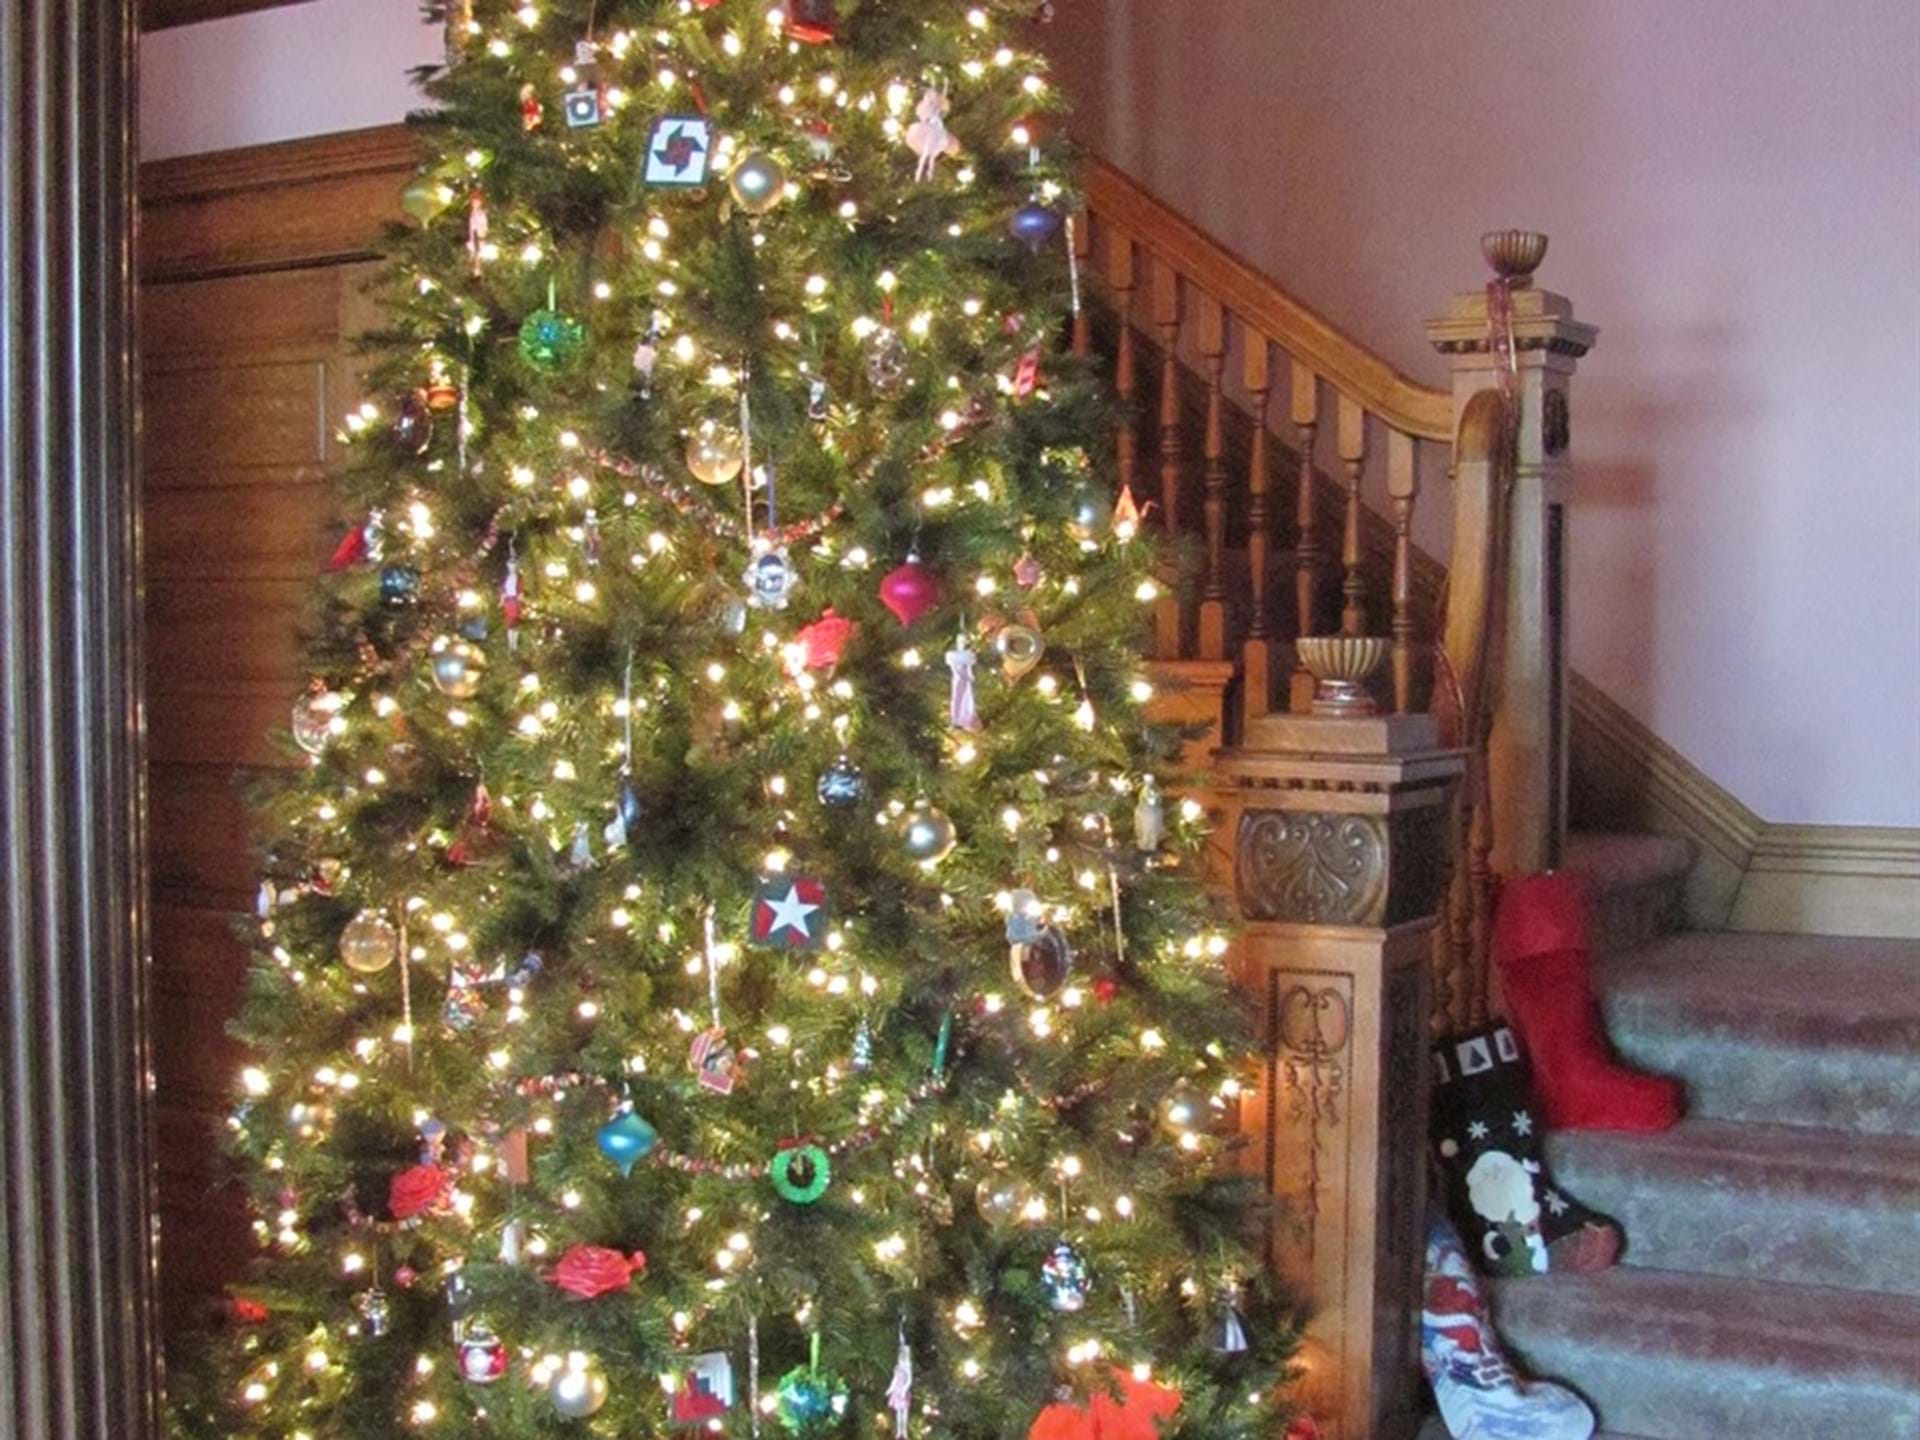 Our Christmas Tree!